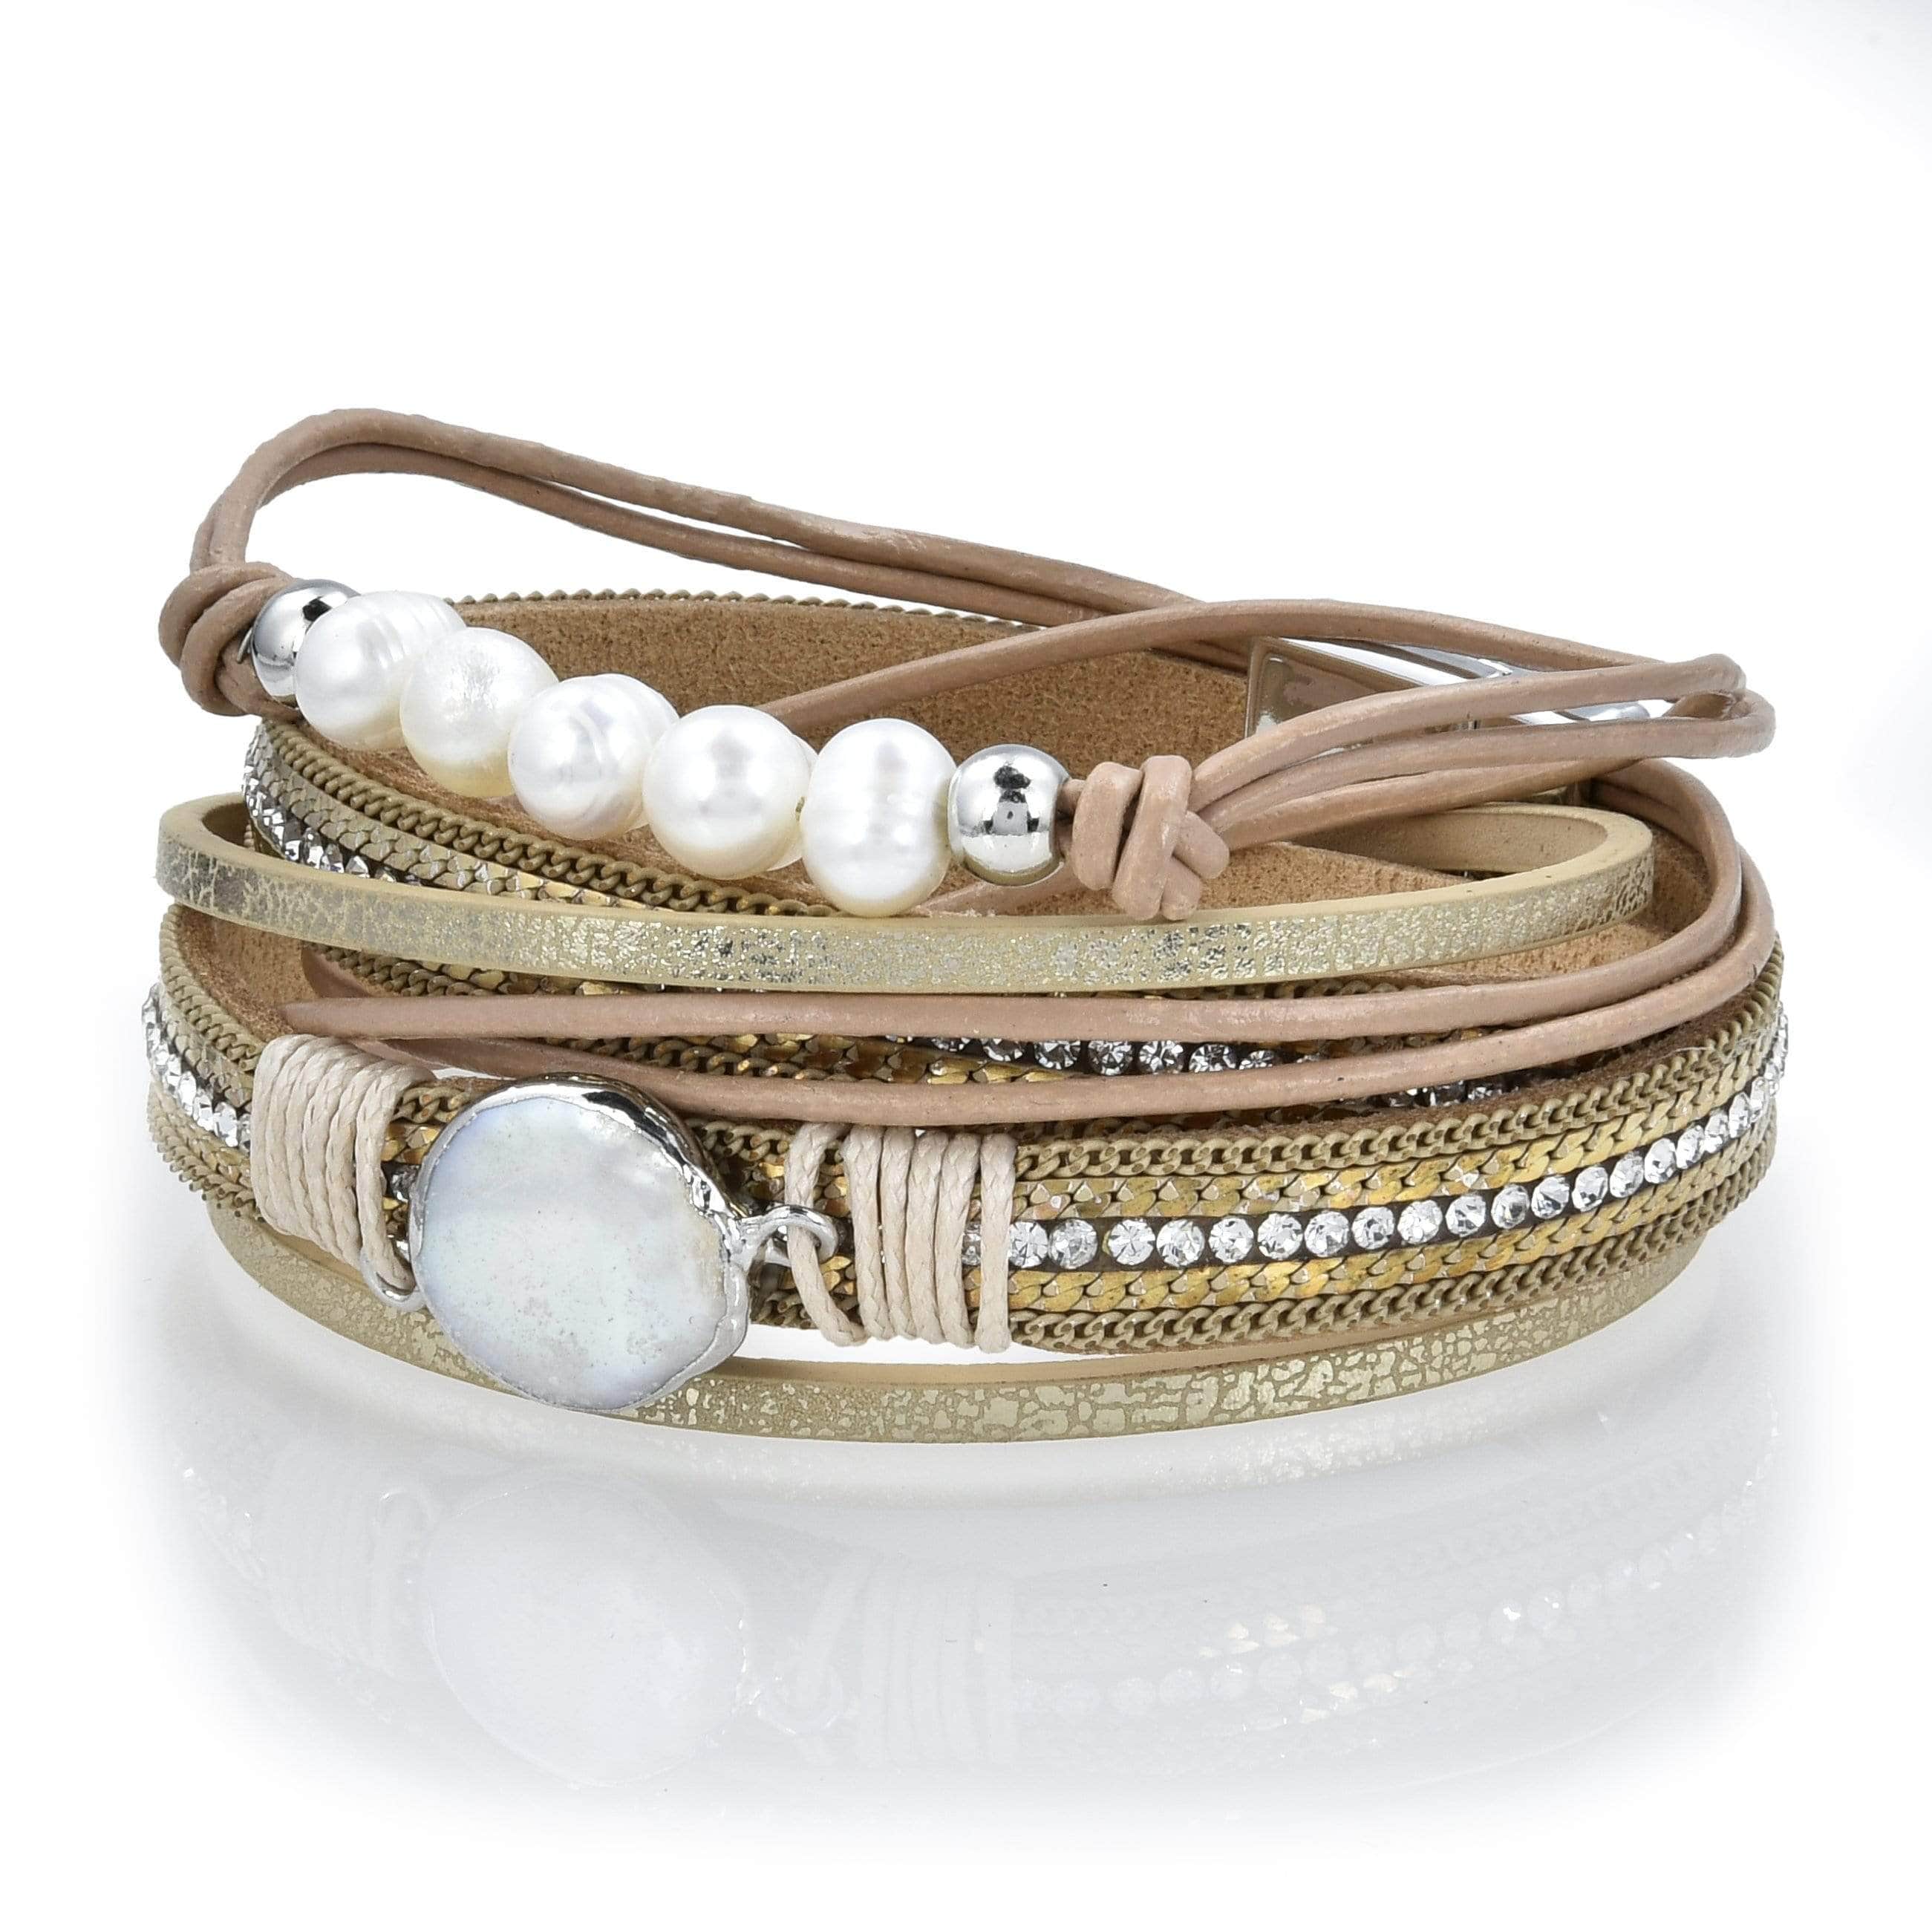 Kalifano Multiwrap Bracelets Multiple Strand Pearl, Gold and Diamonds Gold Bracelet with Magnetic Clasp BMW-21-GD